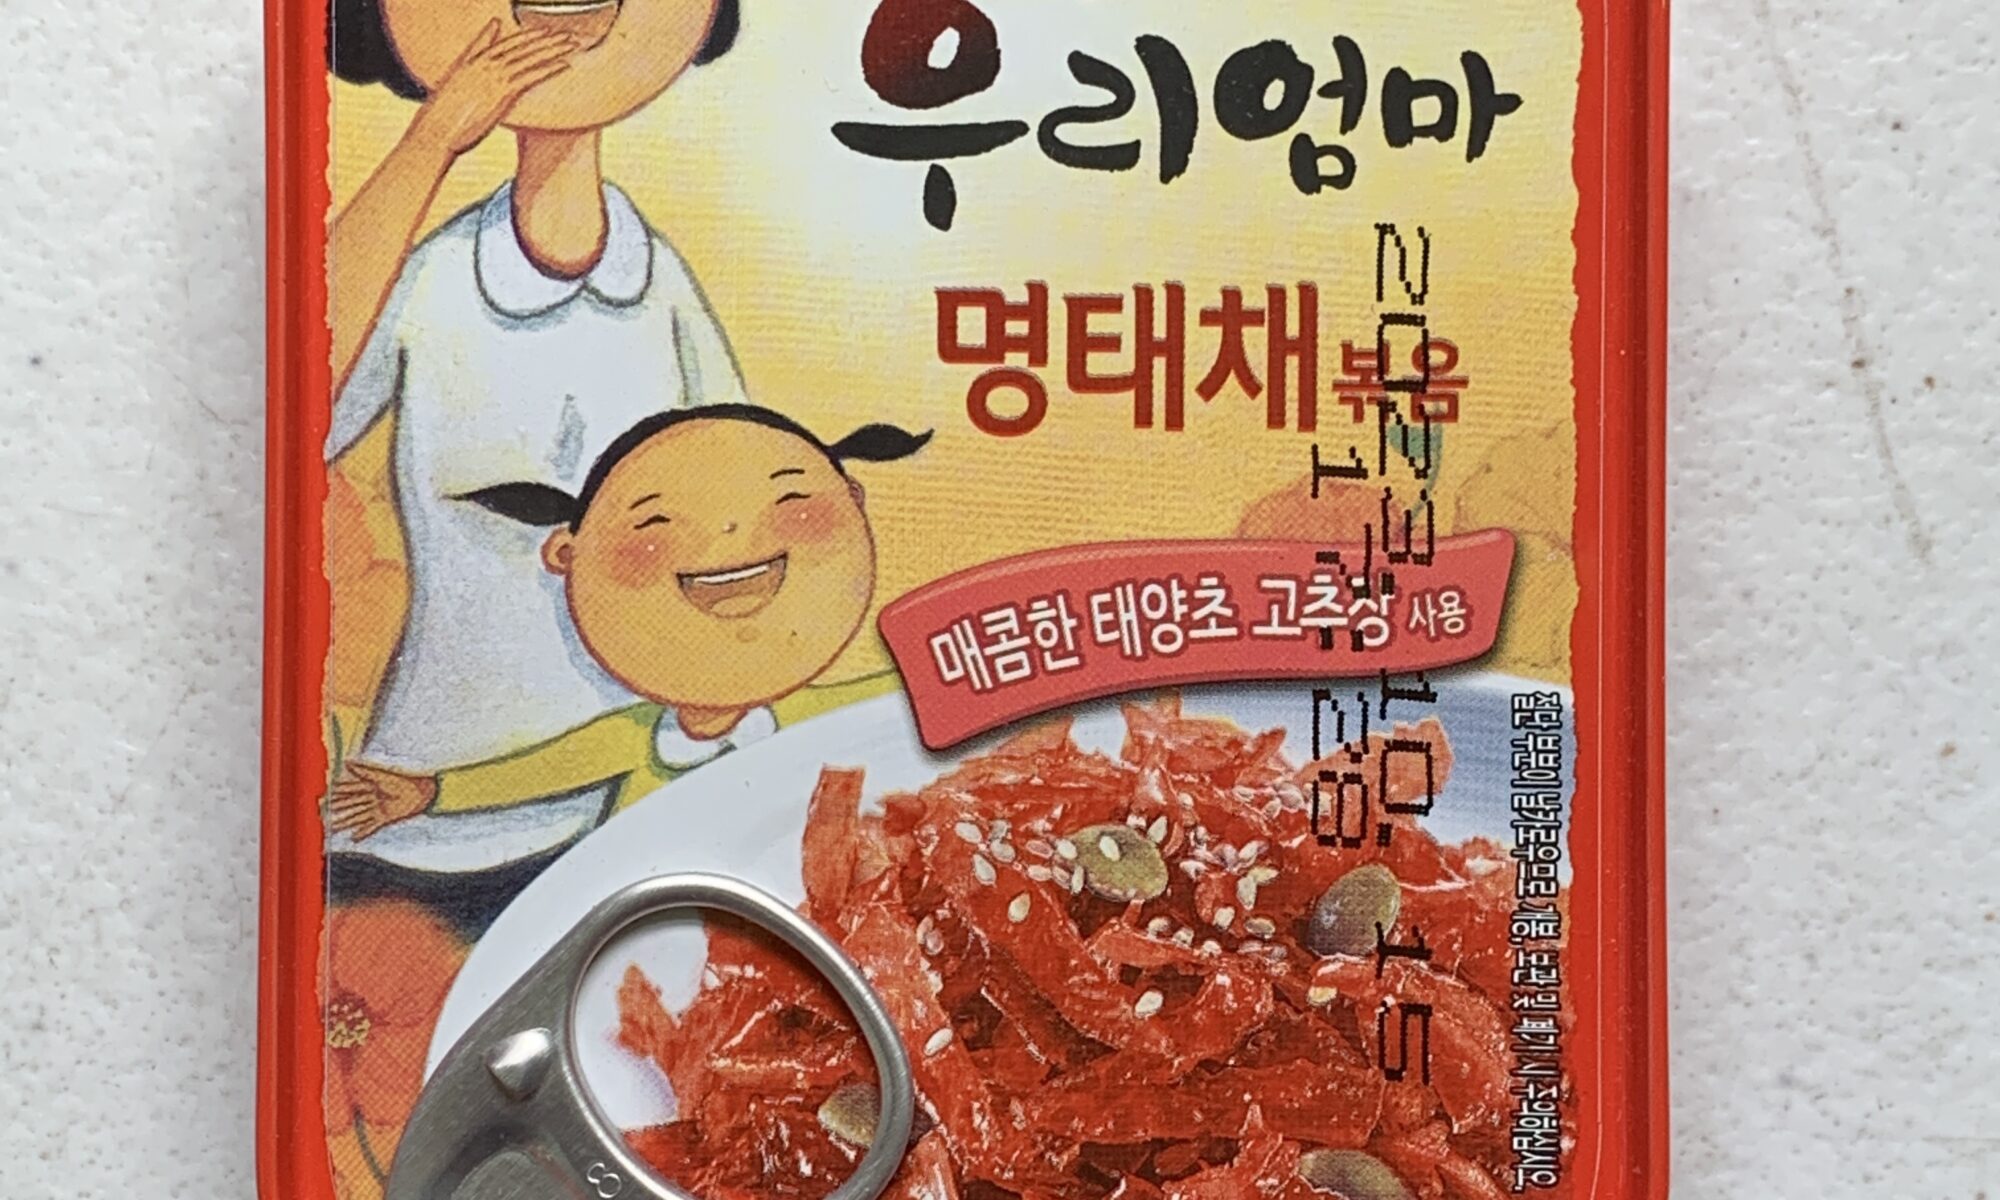 Image of the front of a tin of Sempio Braised Dried Pollock in Spicy Sauce (Gochujang)